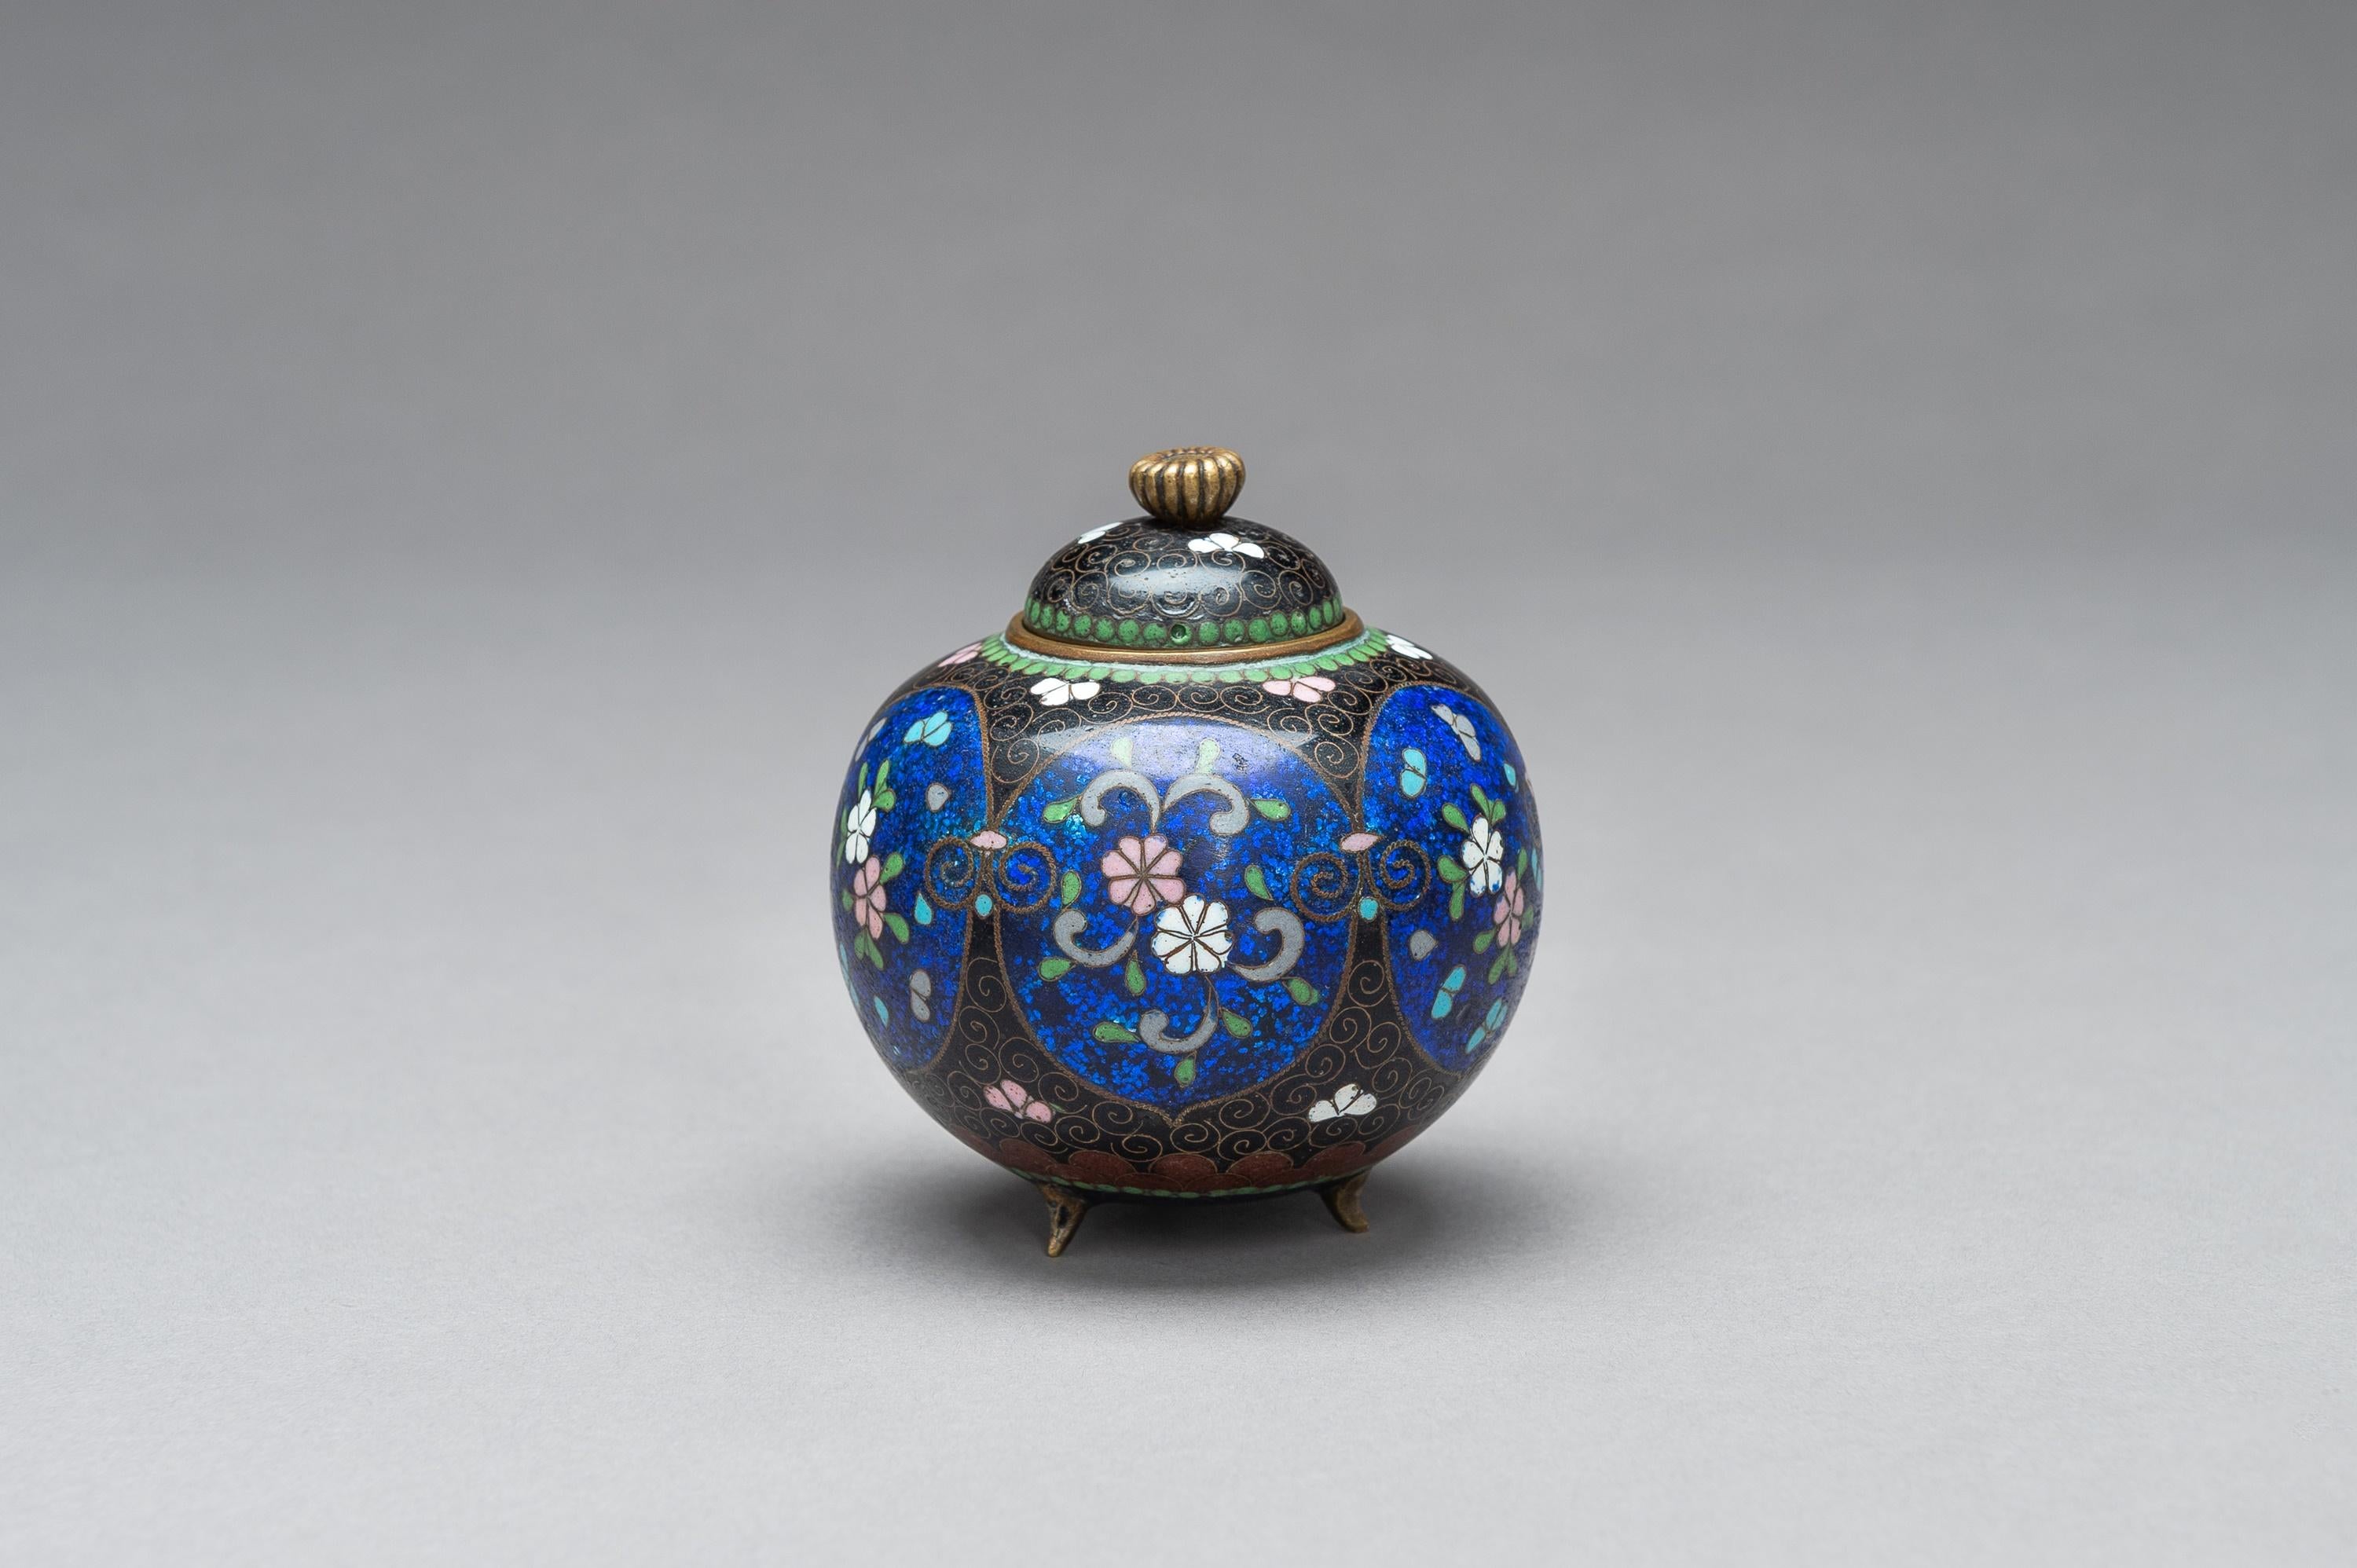 Japanese Cloisonné Koro with Cover, Meiji Period 1